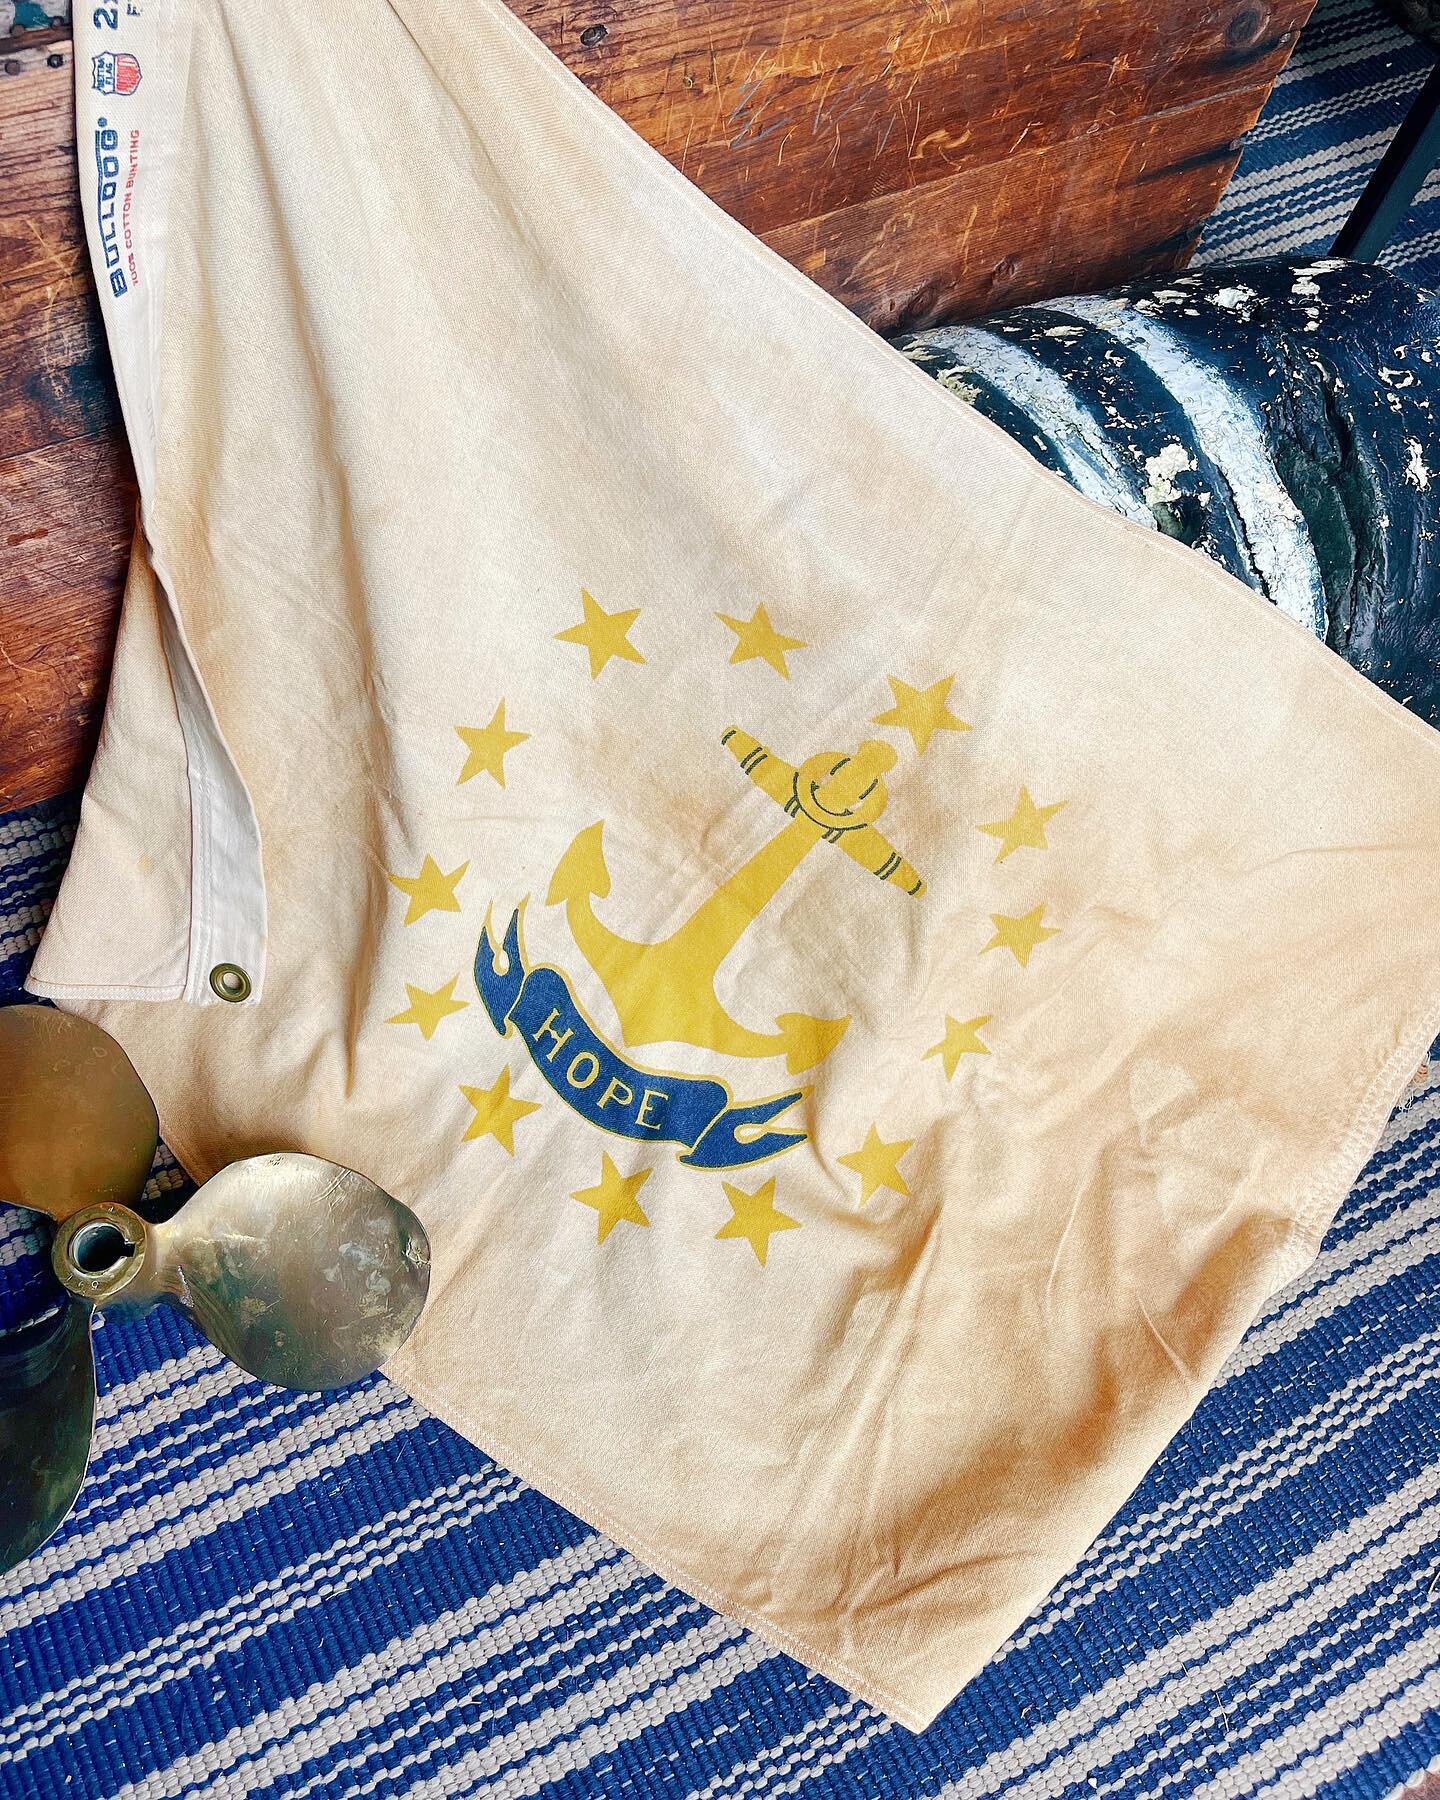 It&rsquo;s Whistle Sale morning! 🚩 This amazing Rhode Island Hope flag and a very special Rainbow Fleet Nantucket needlepoint are just two of the items coming your way at 9am EST. All item prices include shipping. And a reminder that our Labor Day S